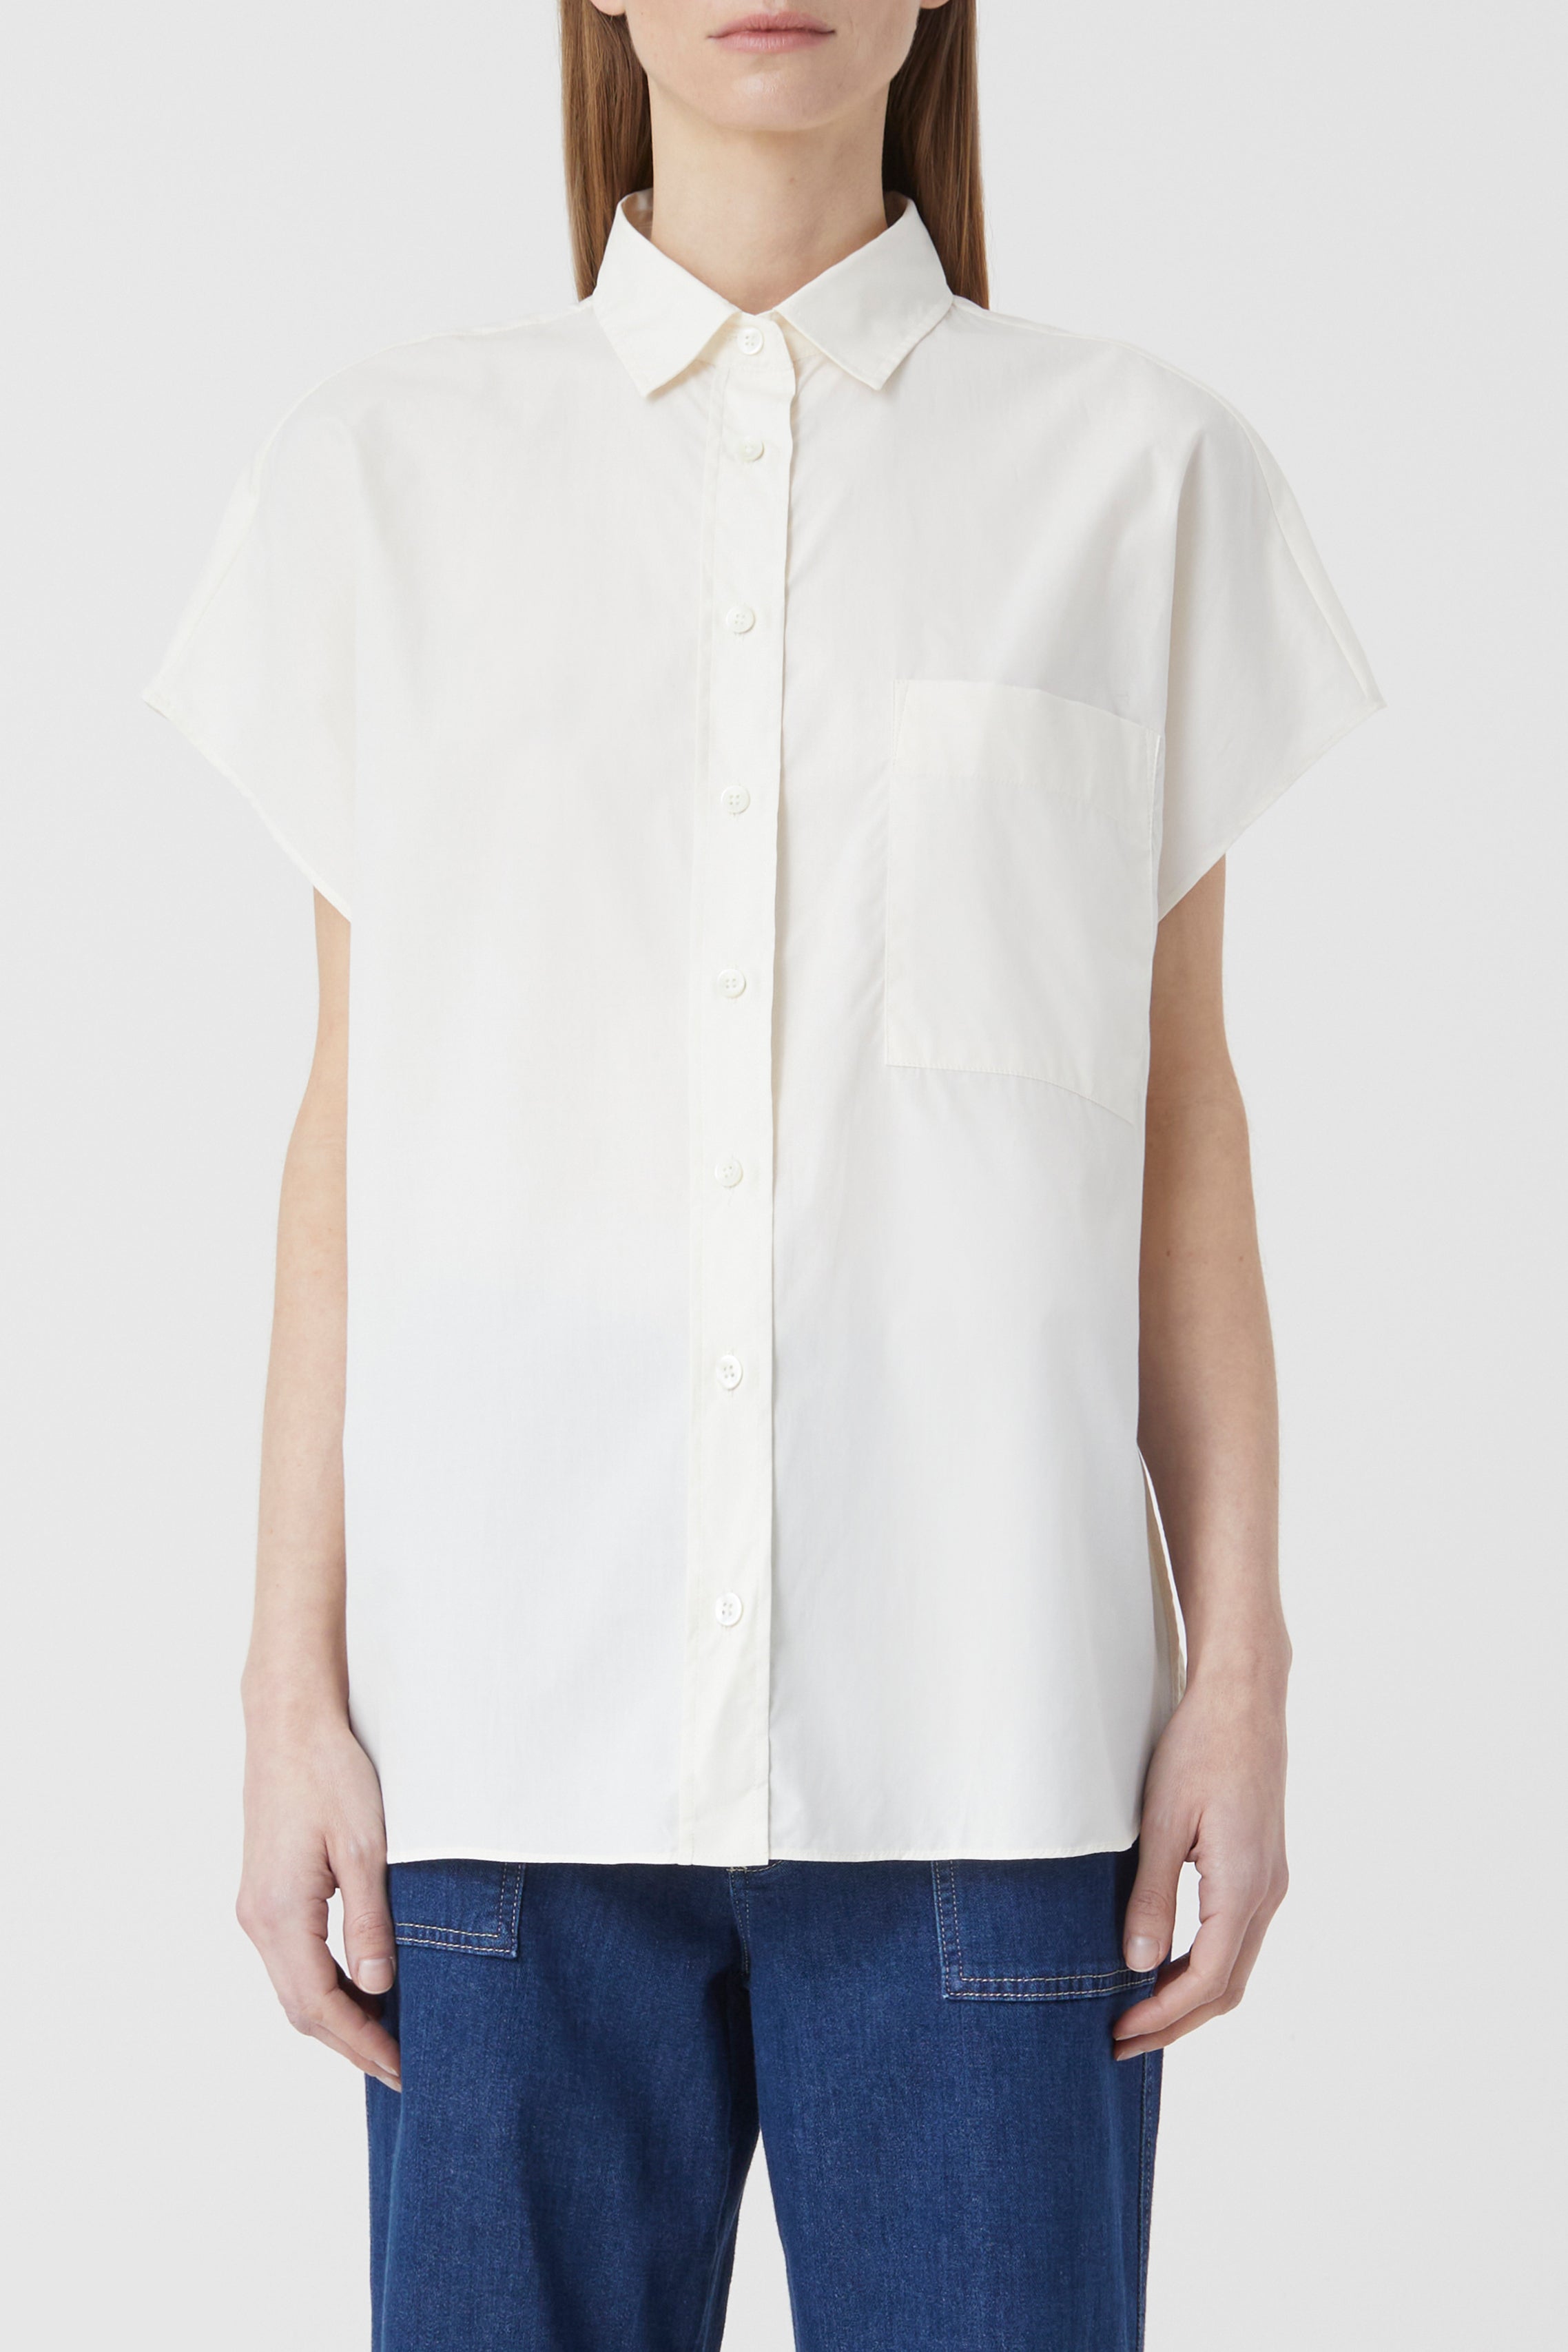 CLOSED-OUTLET-SALE-SHORT-SLEEVE-SHIRT-Blusen-ARCHIVE-COLLECTION_1645e269-9ab6-4abd-9aae-b82c409f189f.jpg